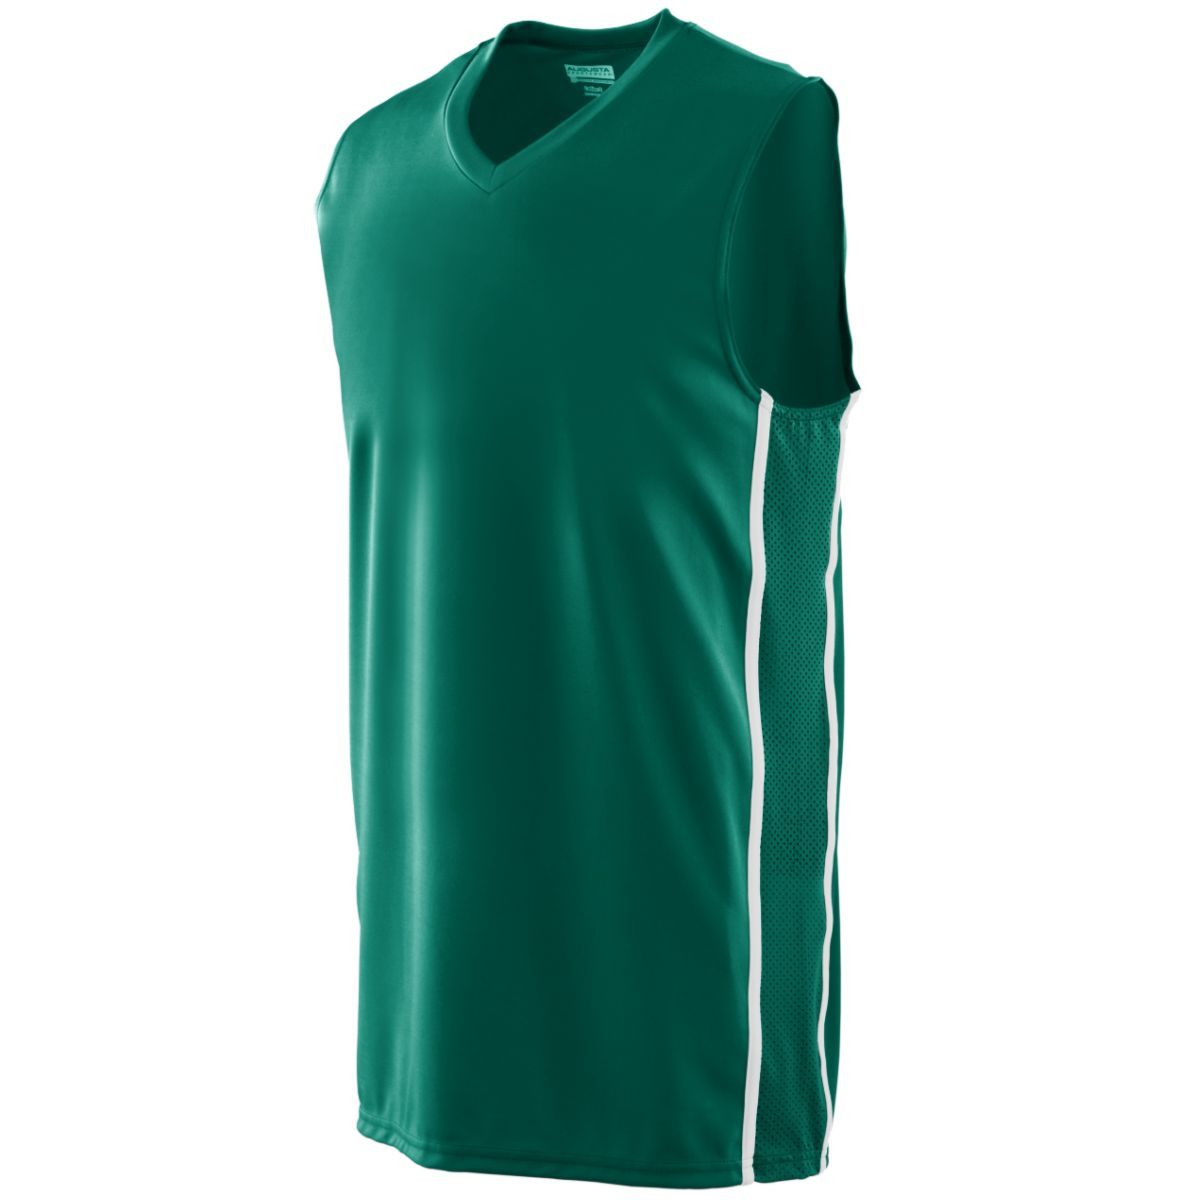 Augusta Sportswear Winning Streak Game Jersey in Dark Green/White  -Part of the Adult, Adult-Jersey, Augusta-Products, Basketball, Shirts, All-Sports, All-Sports-1 product lines at KanaleyCreations.com